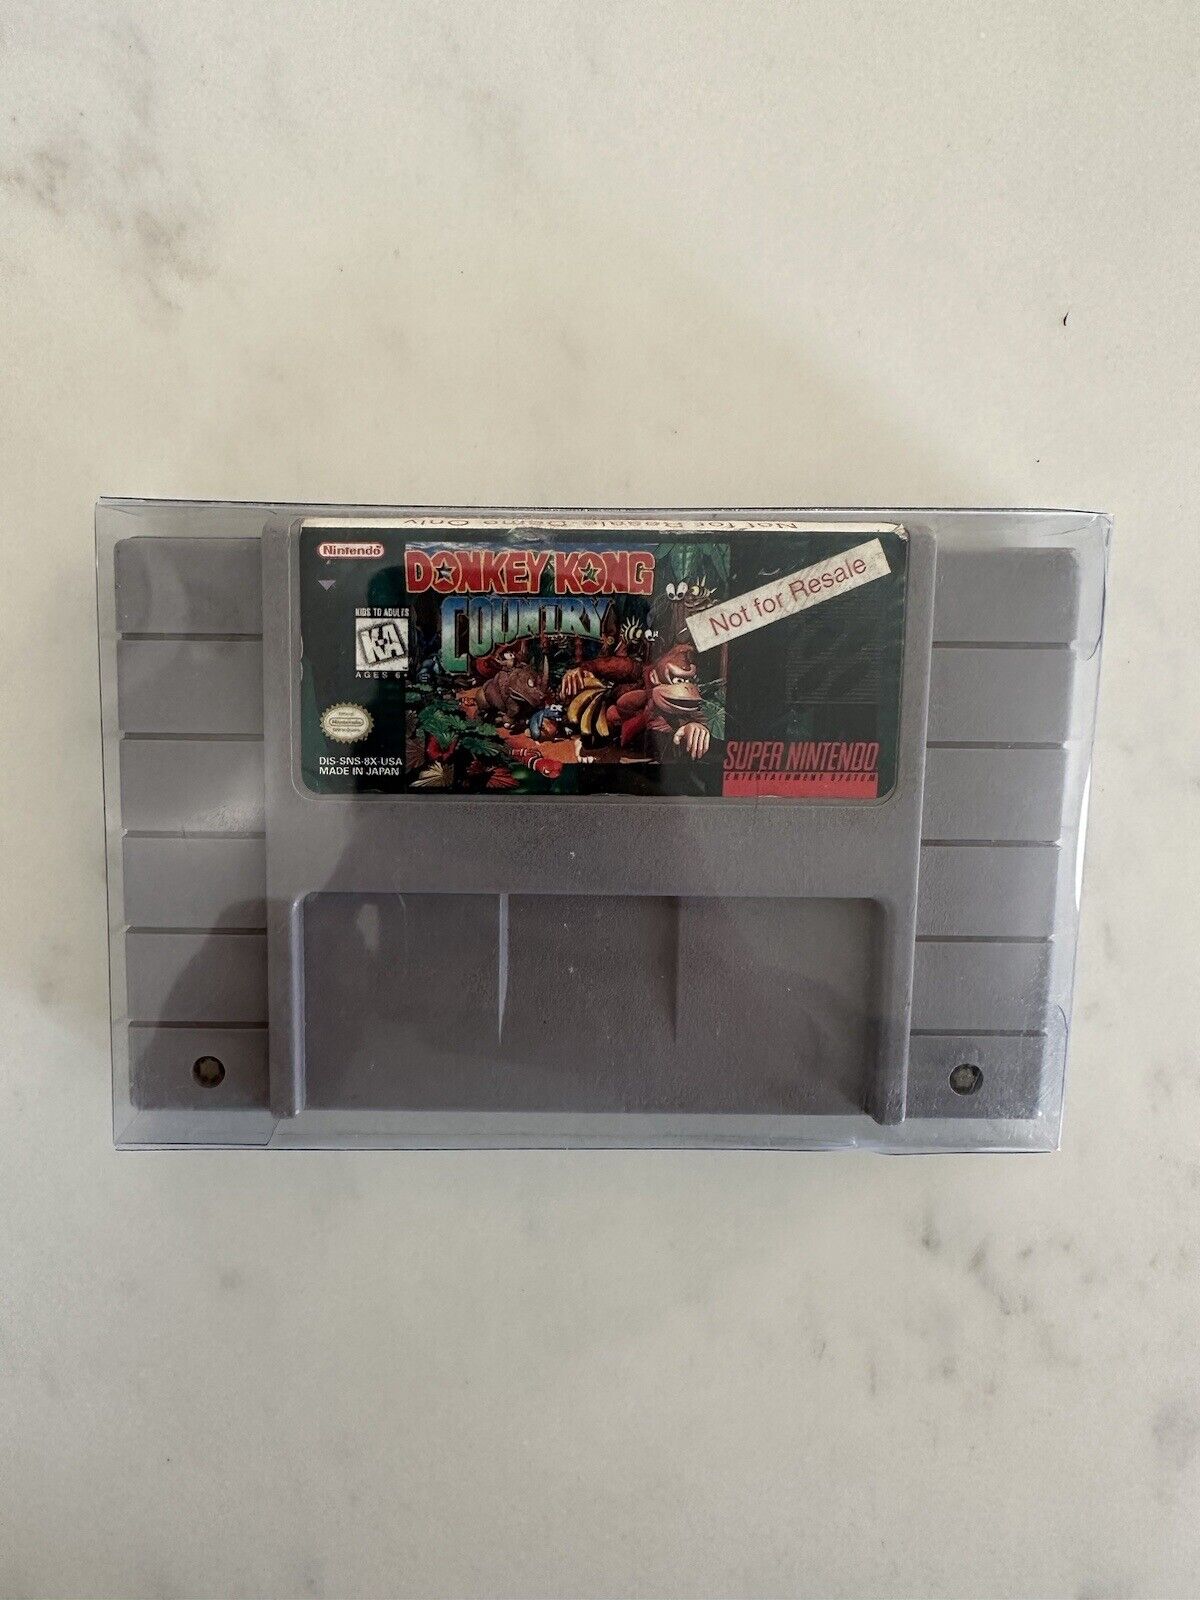 Donkey Kong Country (Super Nintendo, 1994) Not for Resale Extremely RARE Variant